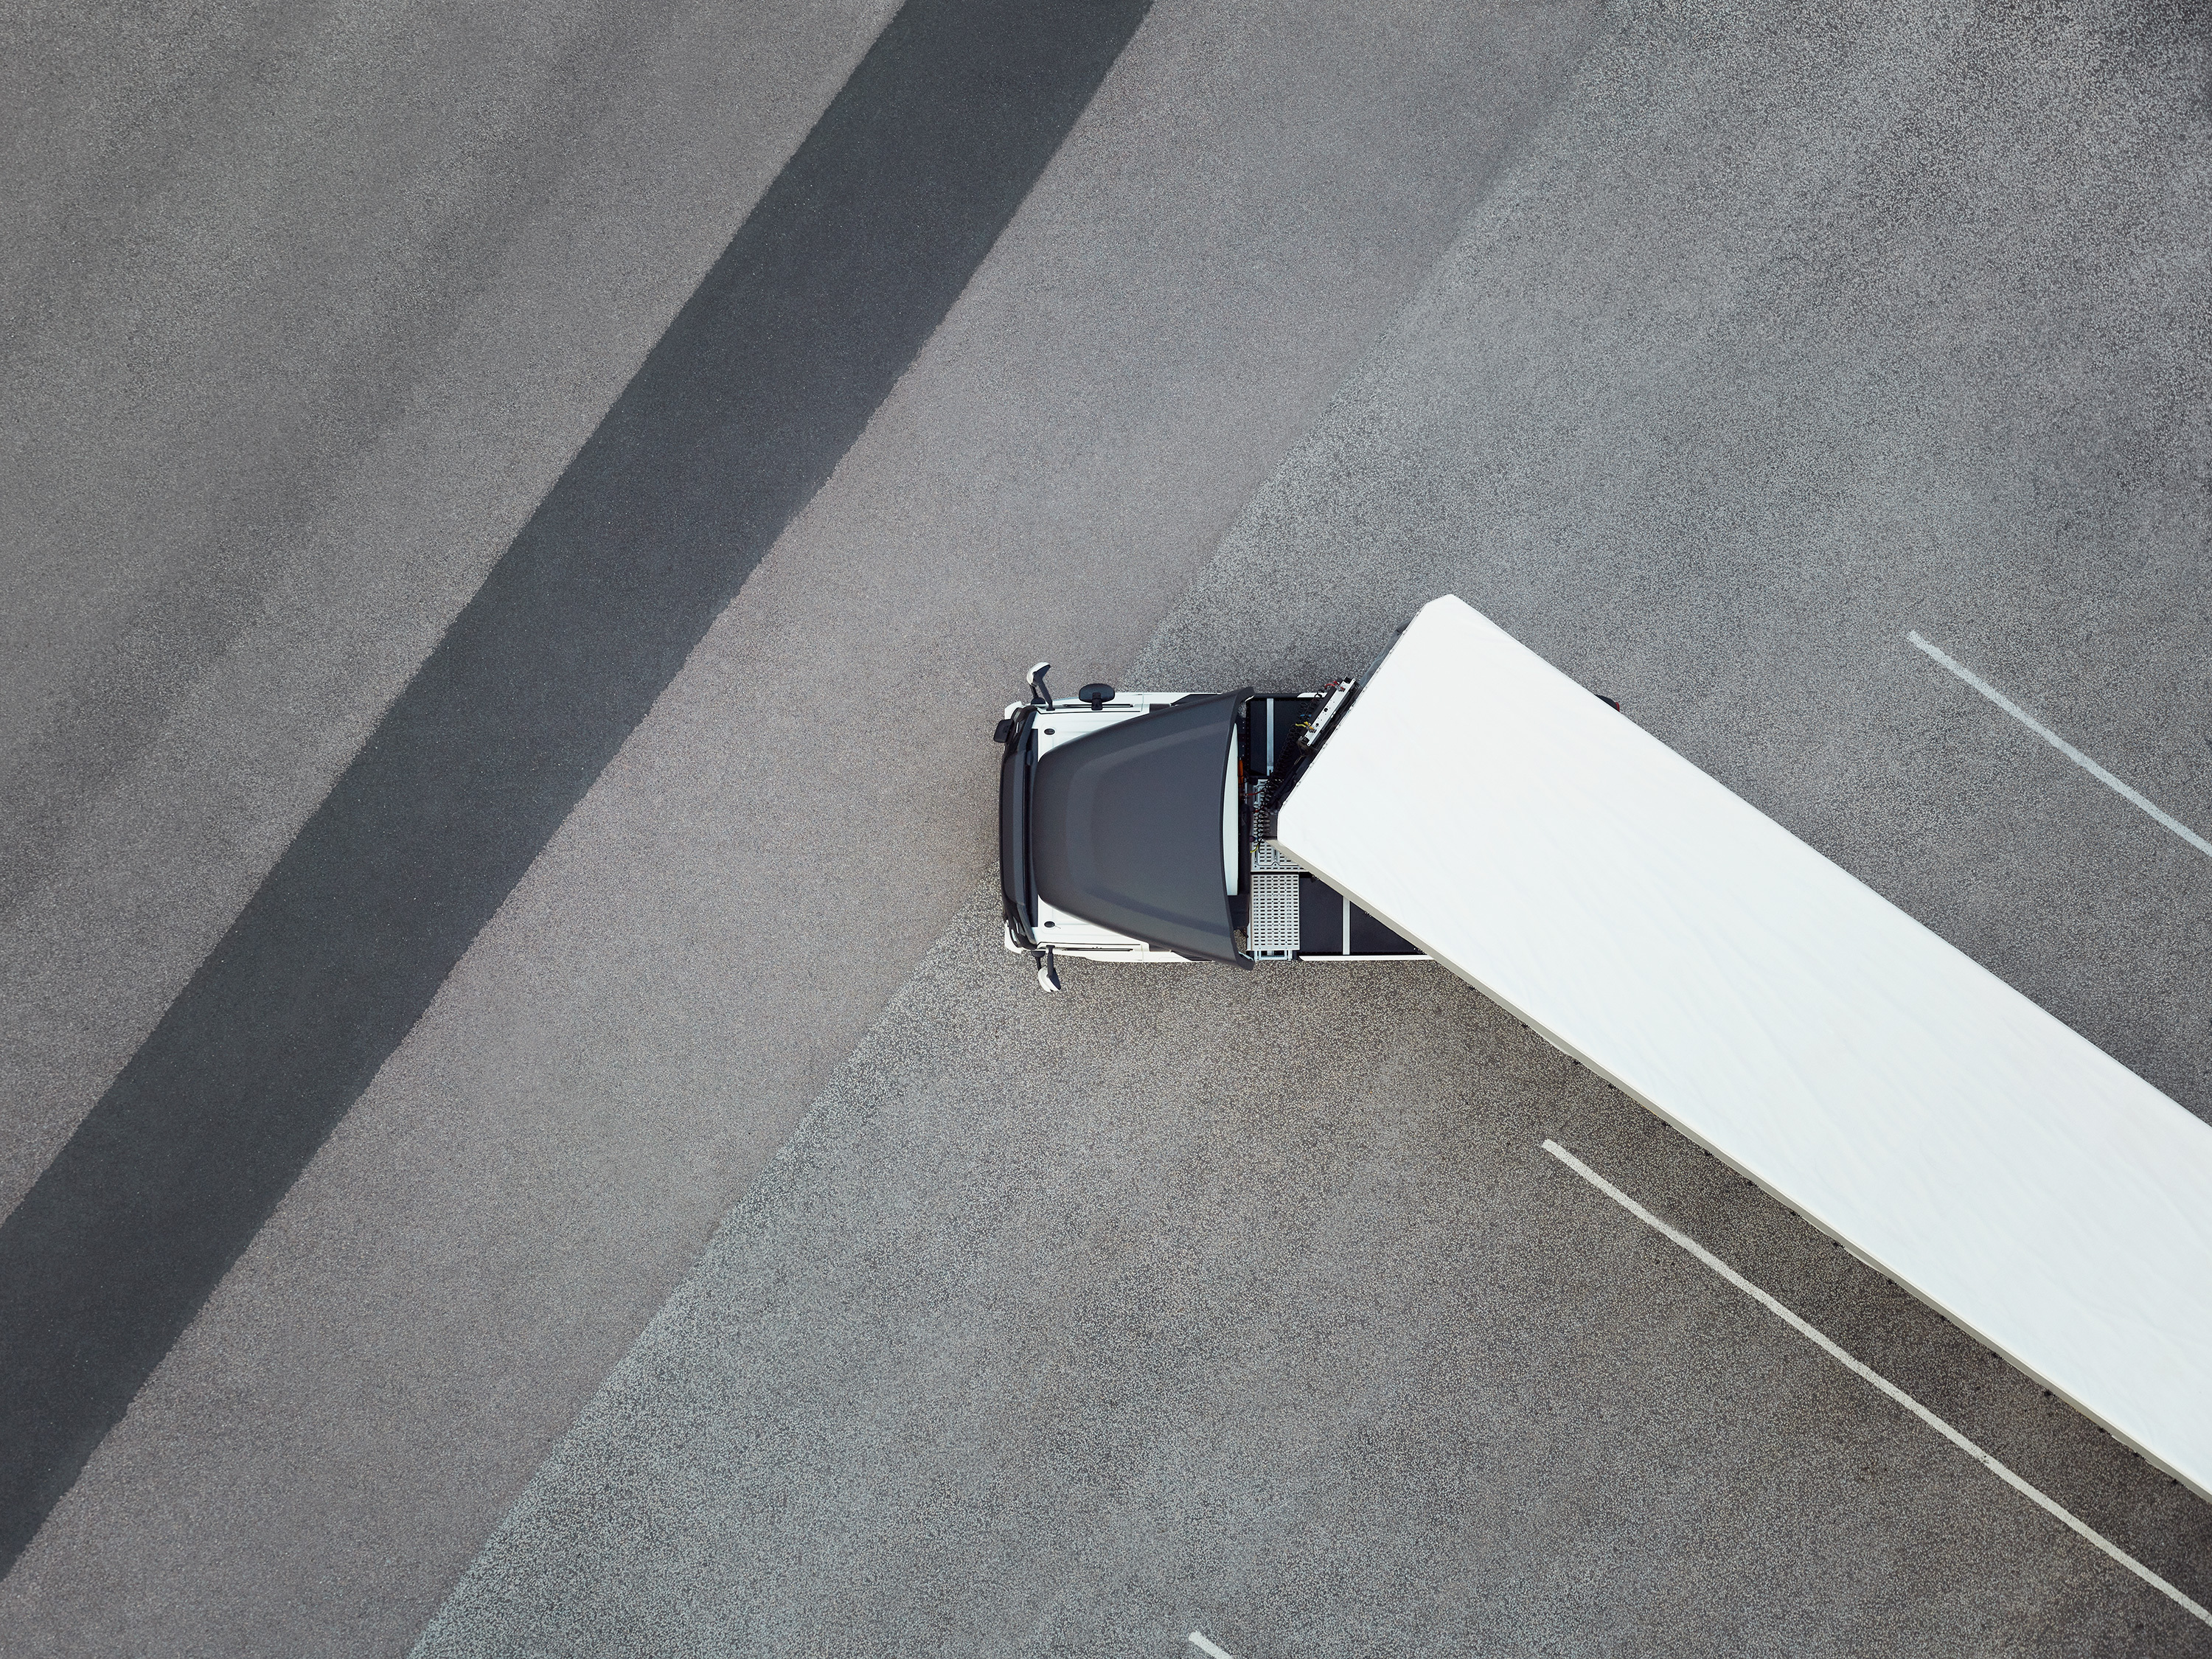 An overhead shot of a truck turning.